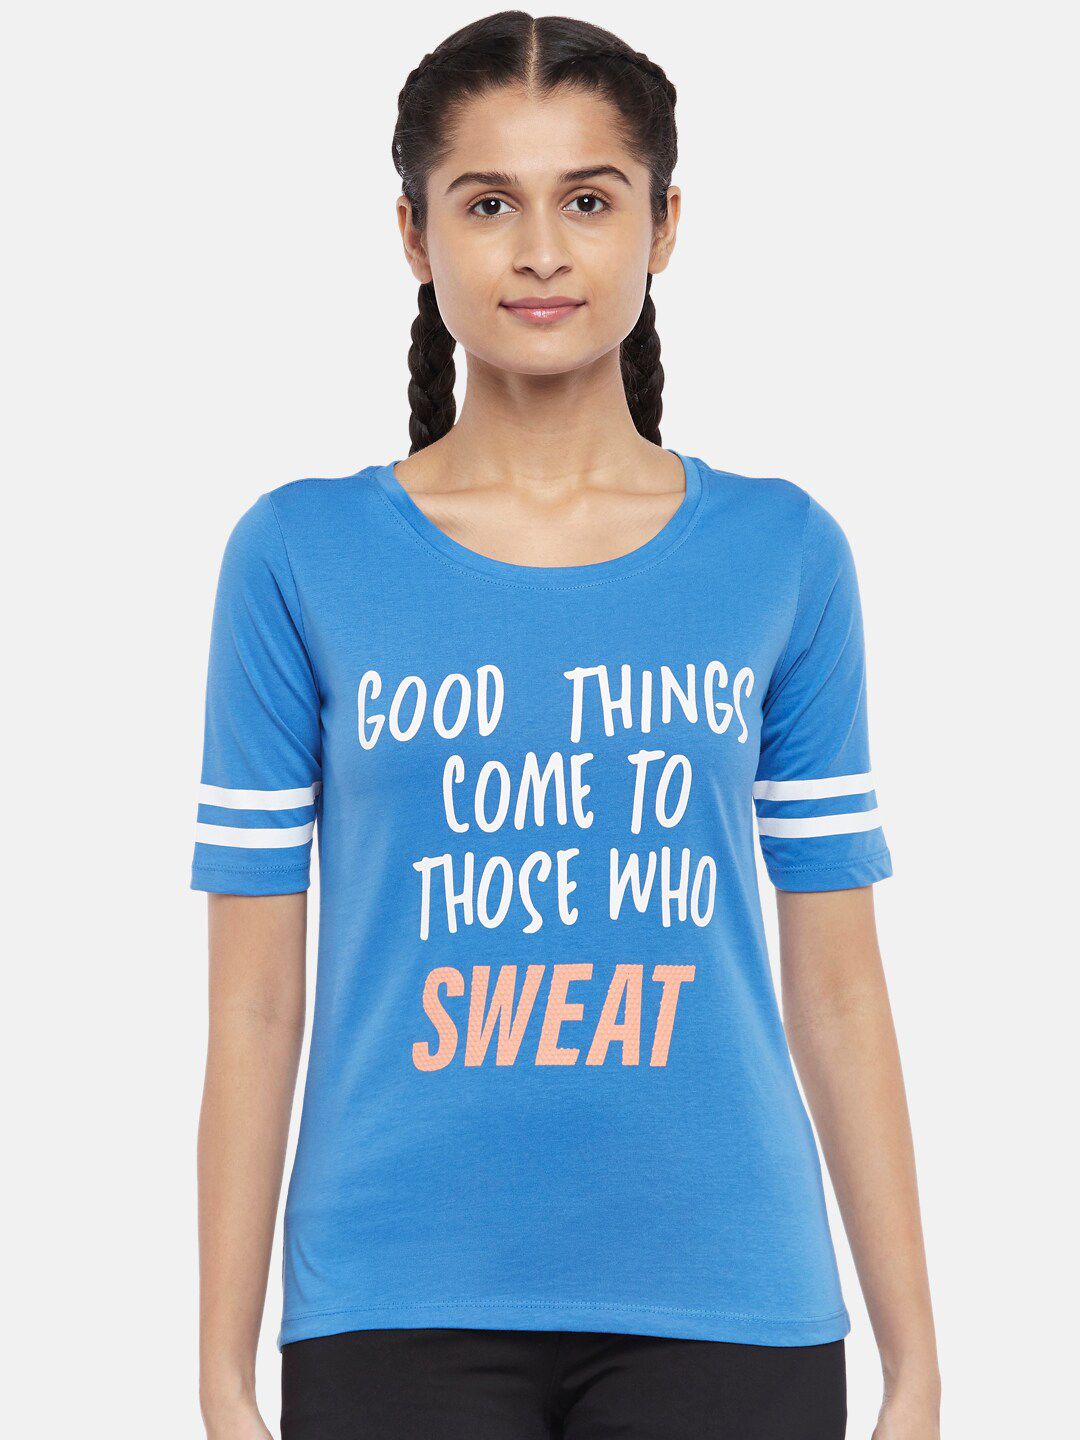 Ajile by Pantaloons Women Blue & White Typography Printed Cotton T-shirt Price in India